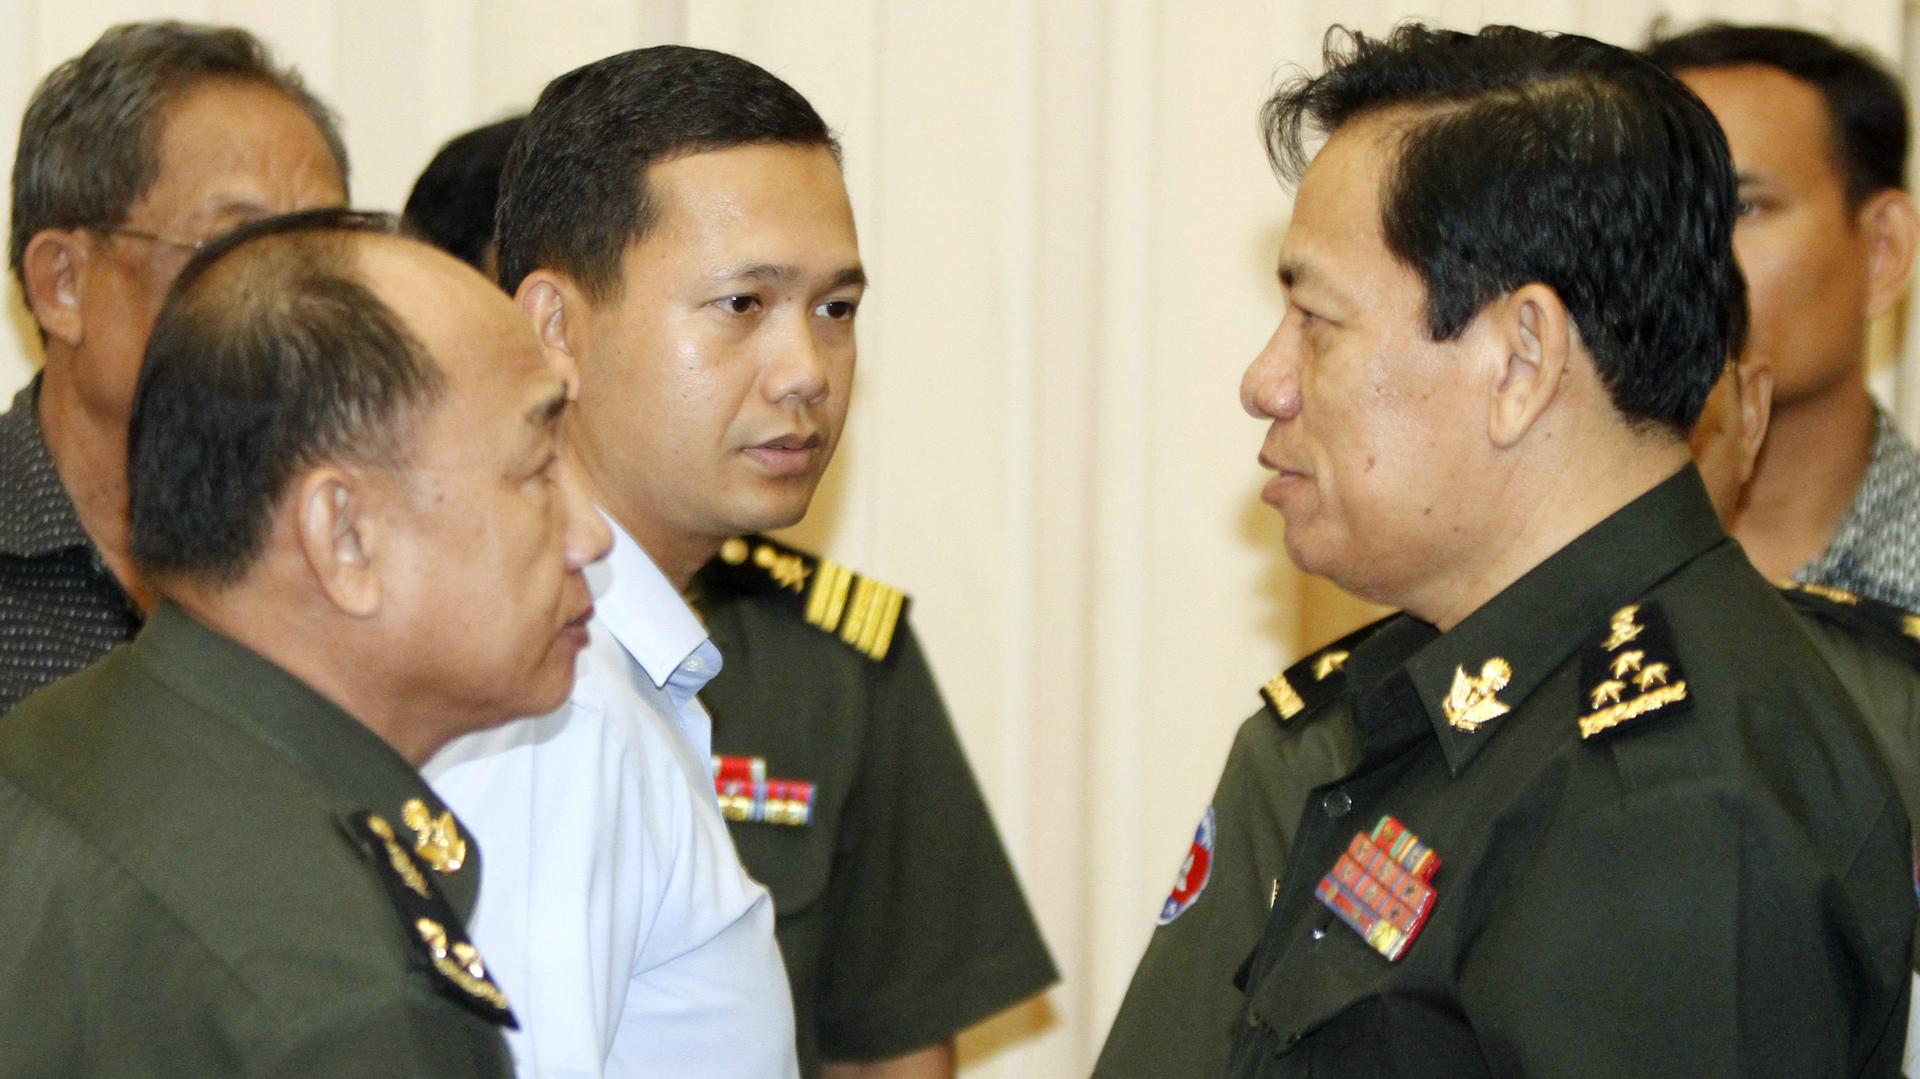 Hun Manet (C), son of Cambodia's Prime Minister Hun Sen, looks at Cambodia's Defense Ministry spokesman Chhum Socheat (R), after a news conference at the Council of Ministers in Phnom Penh April 22, 2011